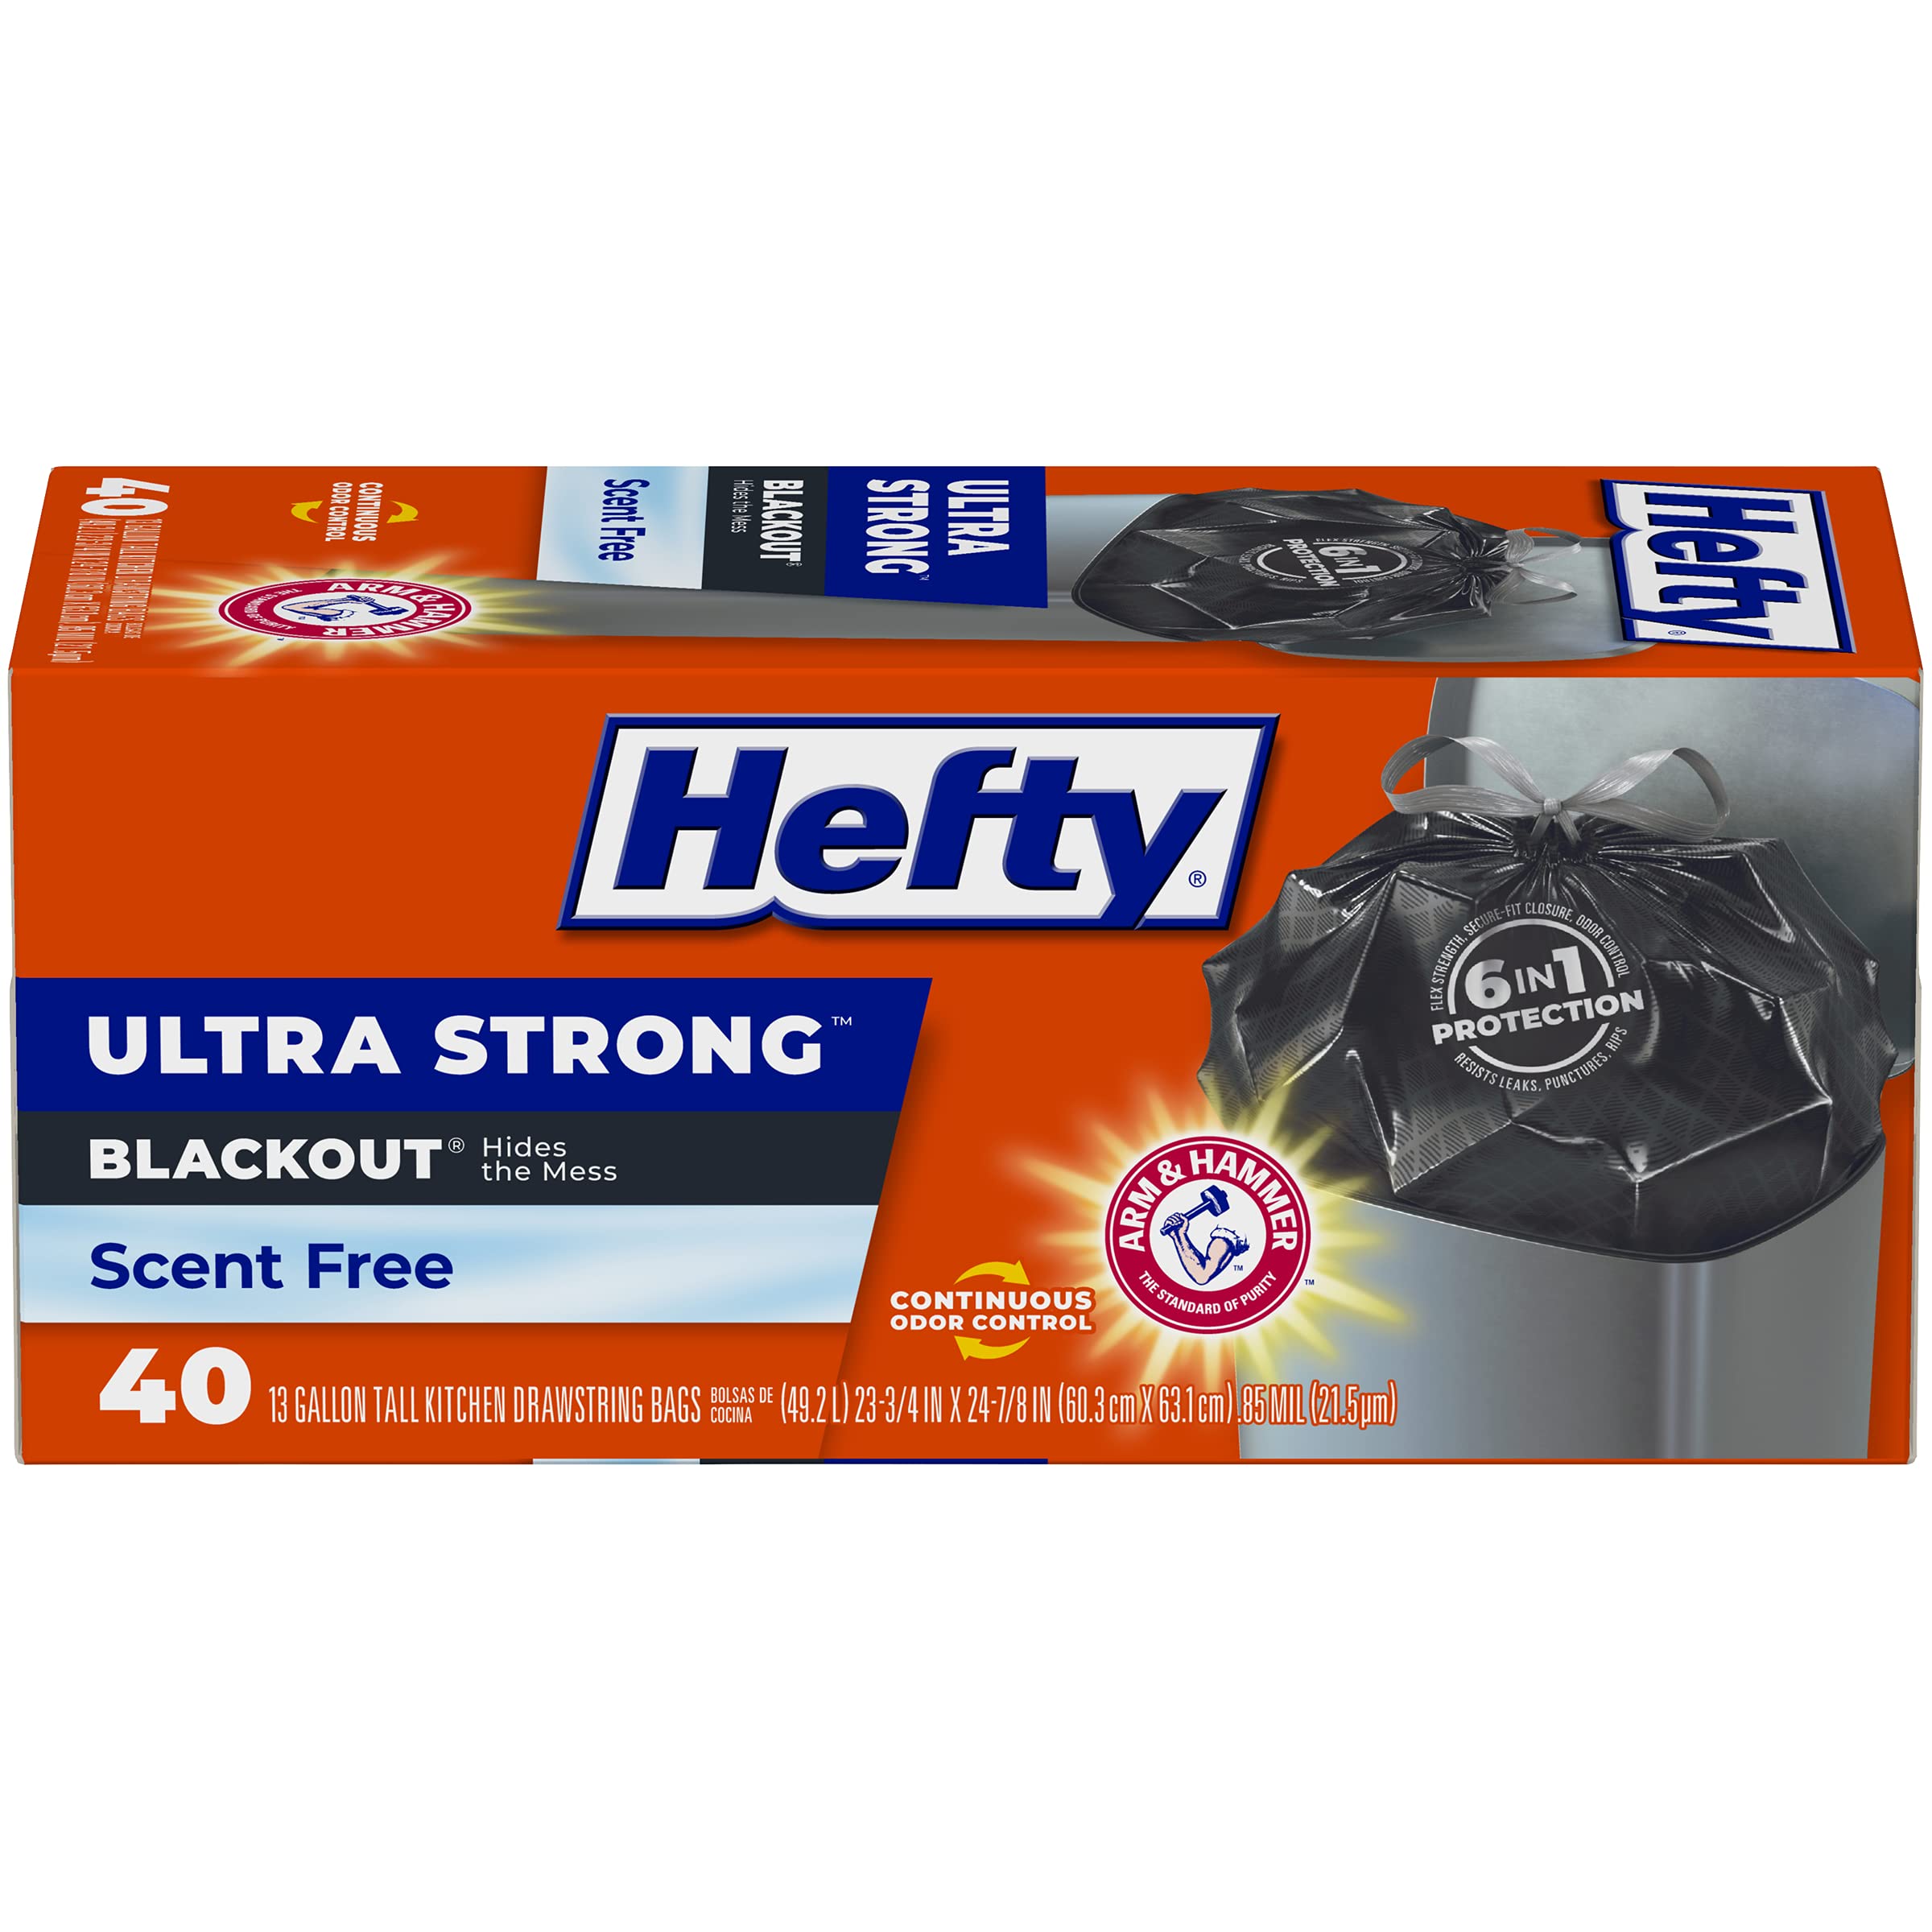 40-Count 13-Gallon Hefty Ultra Strong Tall Kitchen Trash Bags (Black/Unscented) 3 for $12.77 w/ S&S